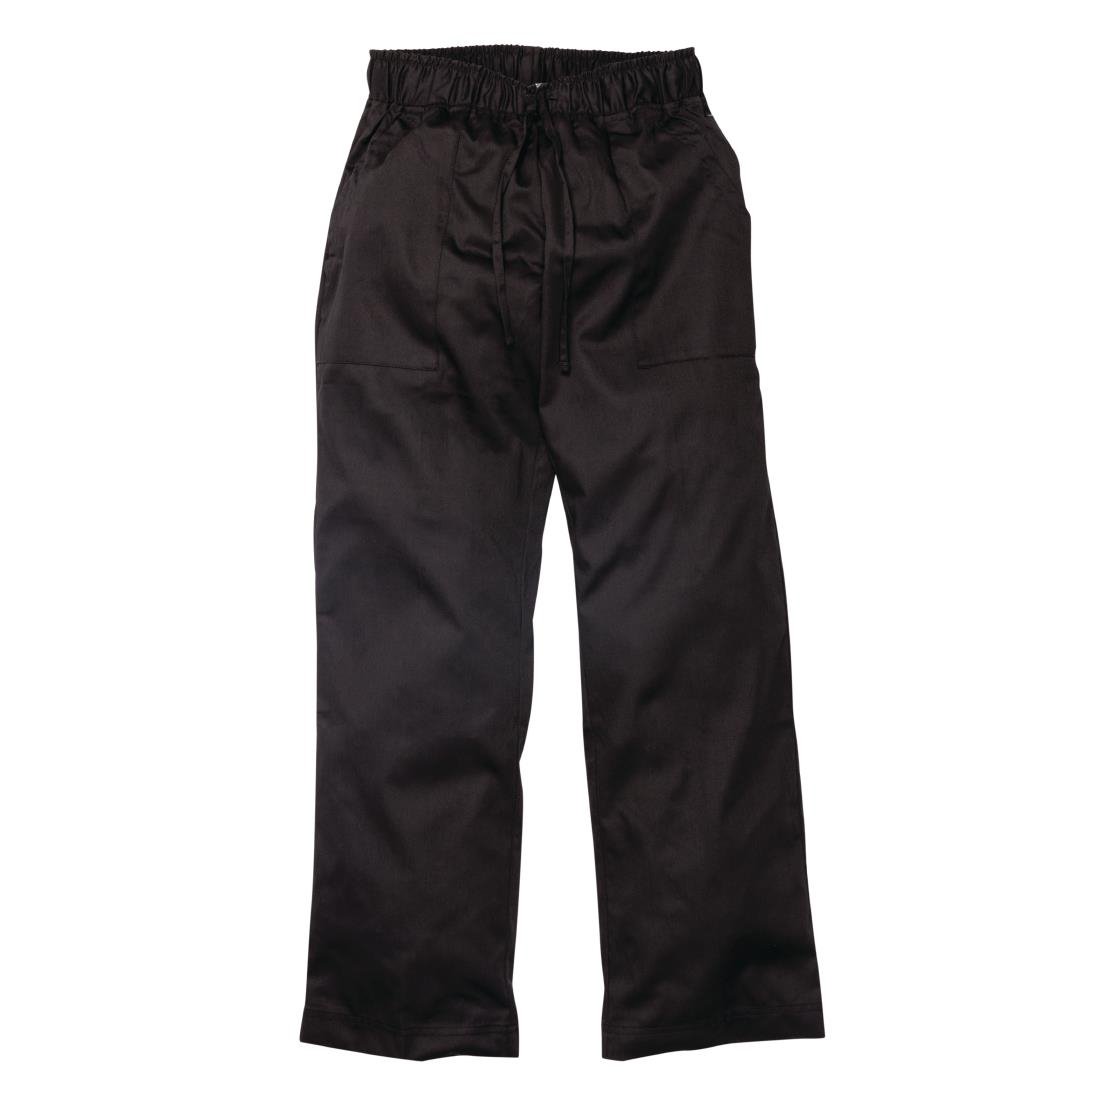 A431-S Chef Works Womens Executive Chef Trousers Black S